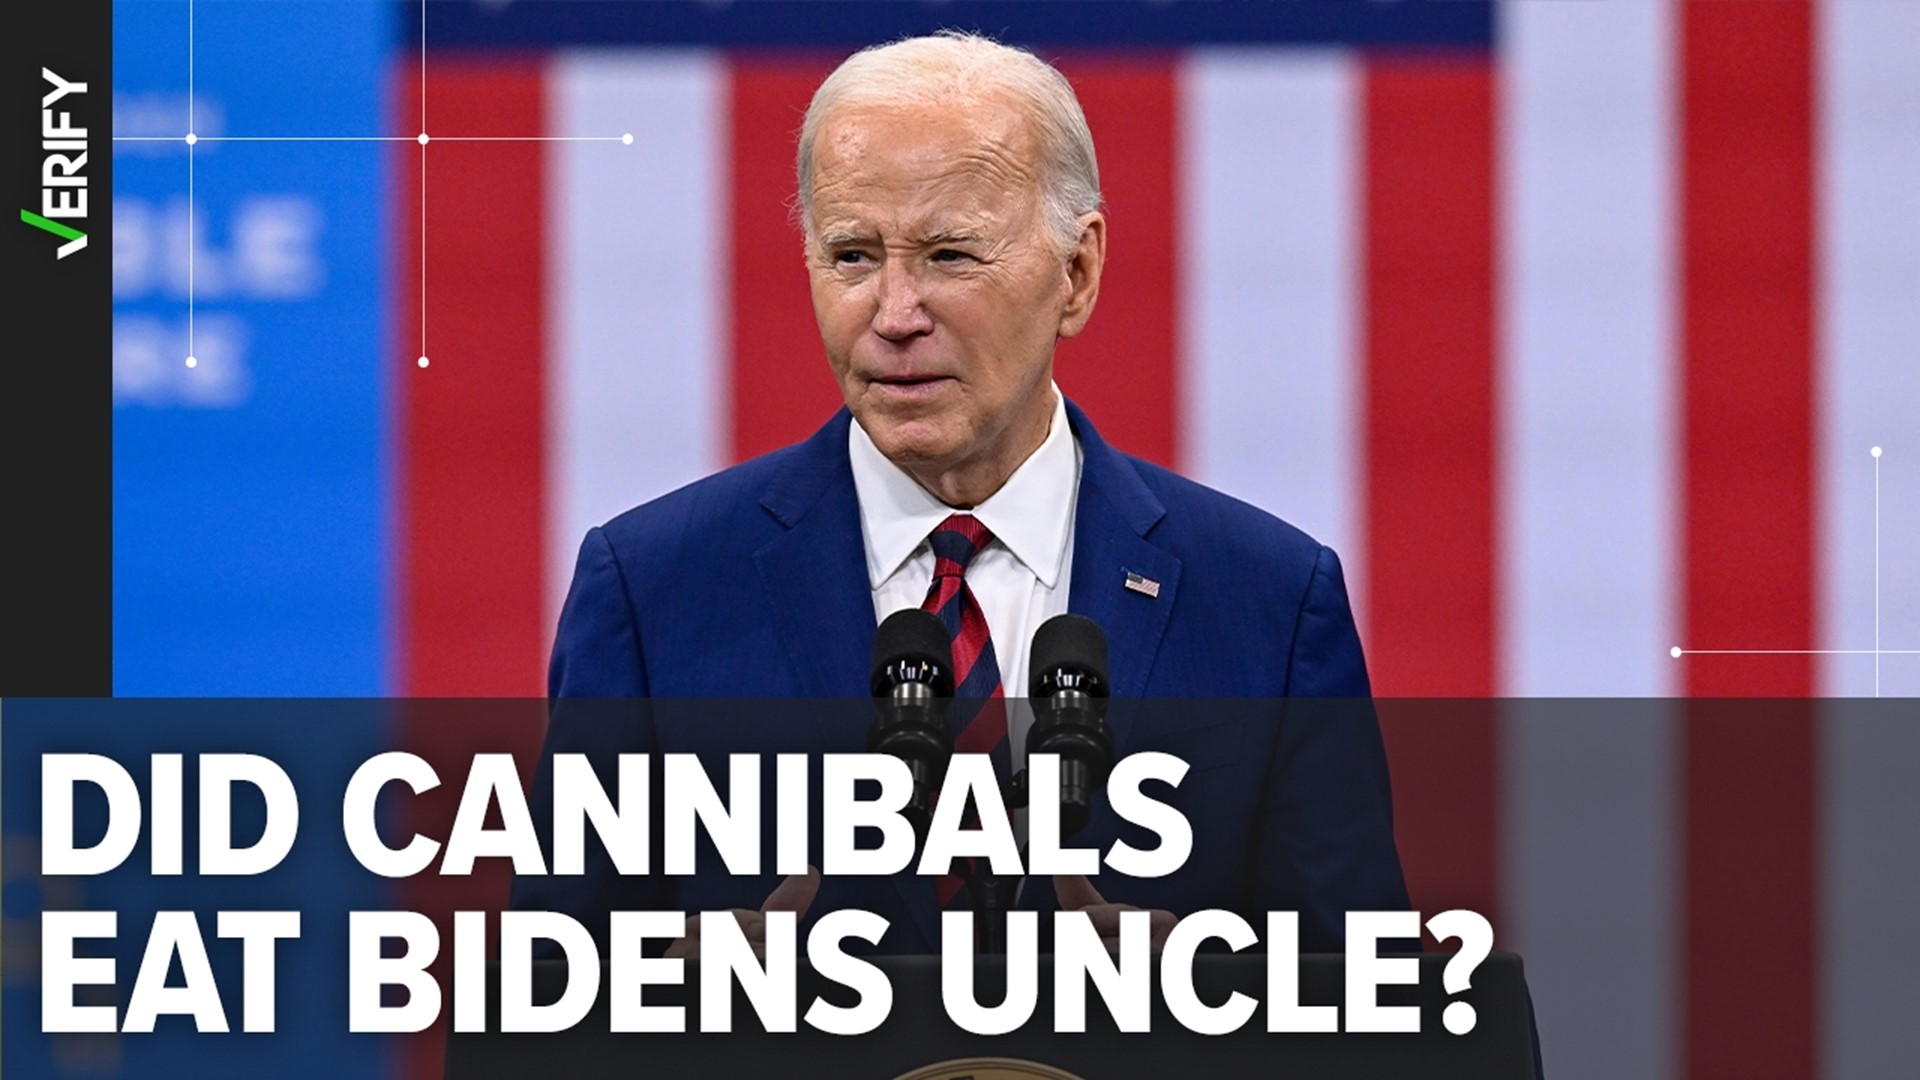 President Joe Biden recently suggested that his uncle, Ambrose J. Finnegan Jr., was eaten by cannibals in New Guinea. That claim isn’t backed by evidence.